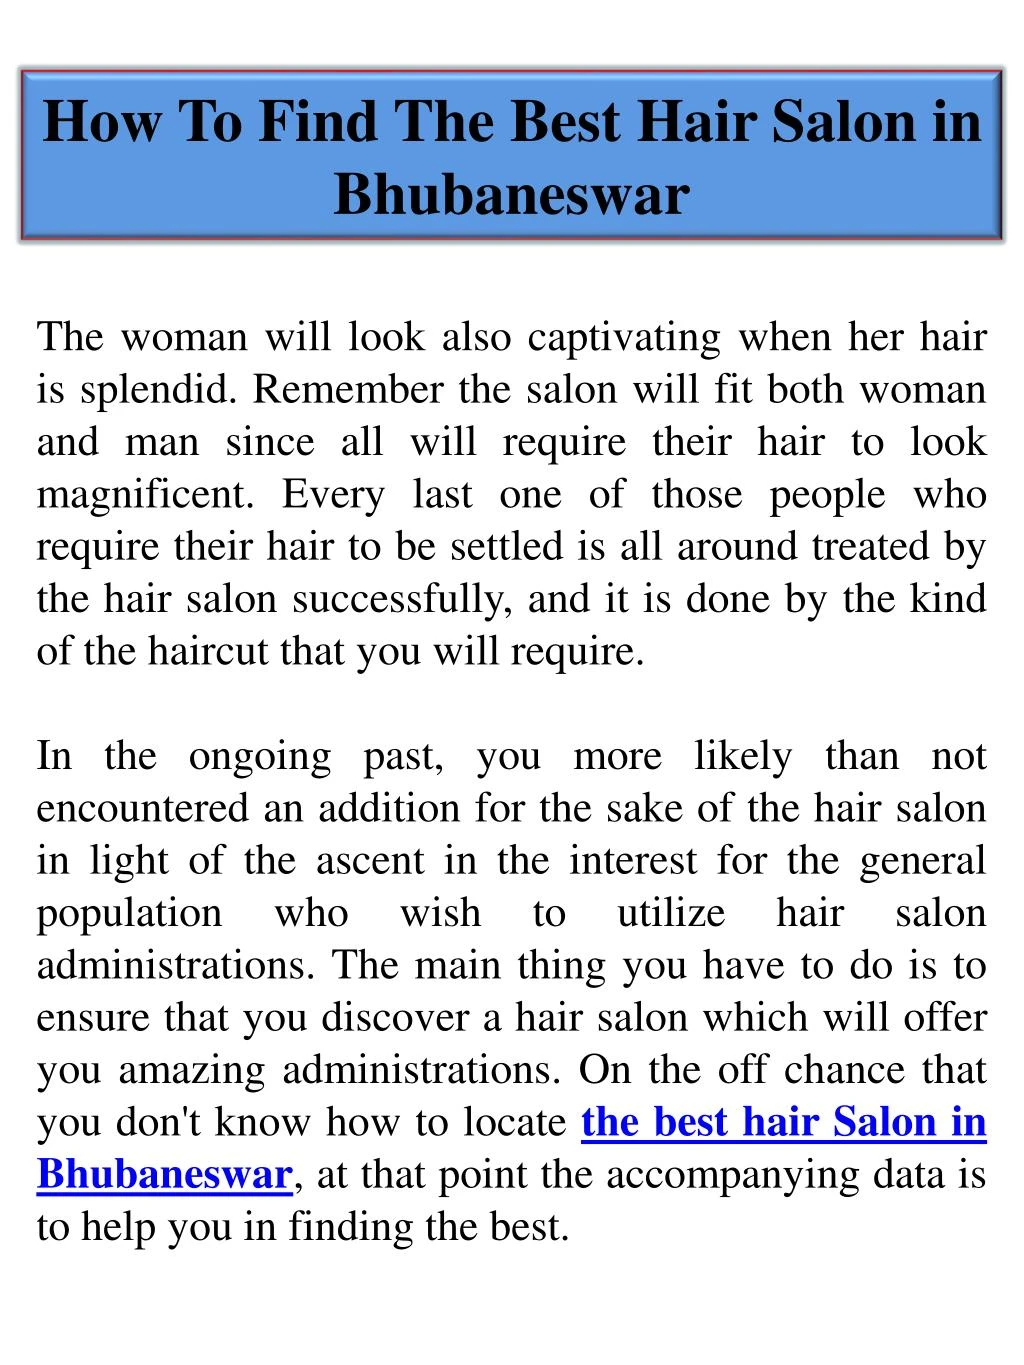 how to find the best hair salon in bhubaneswar